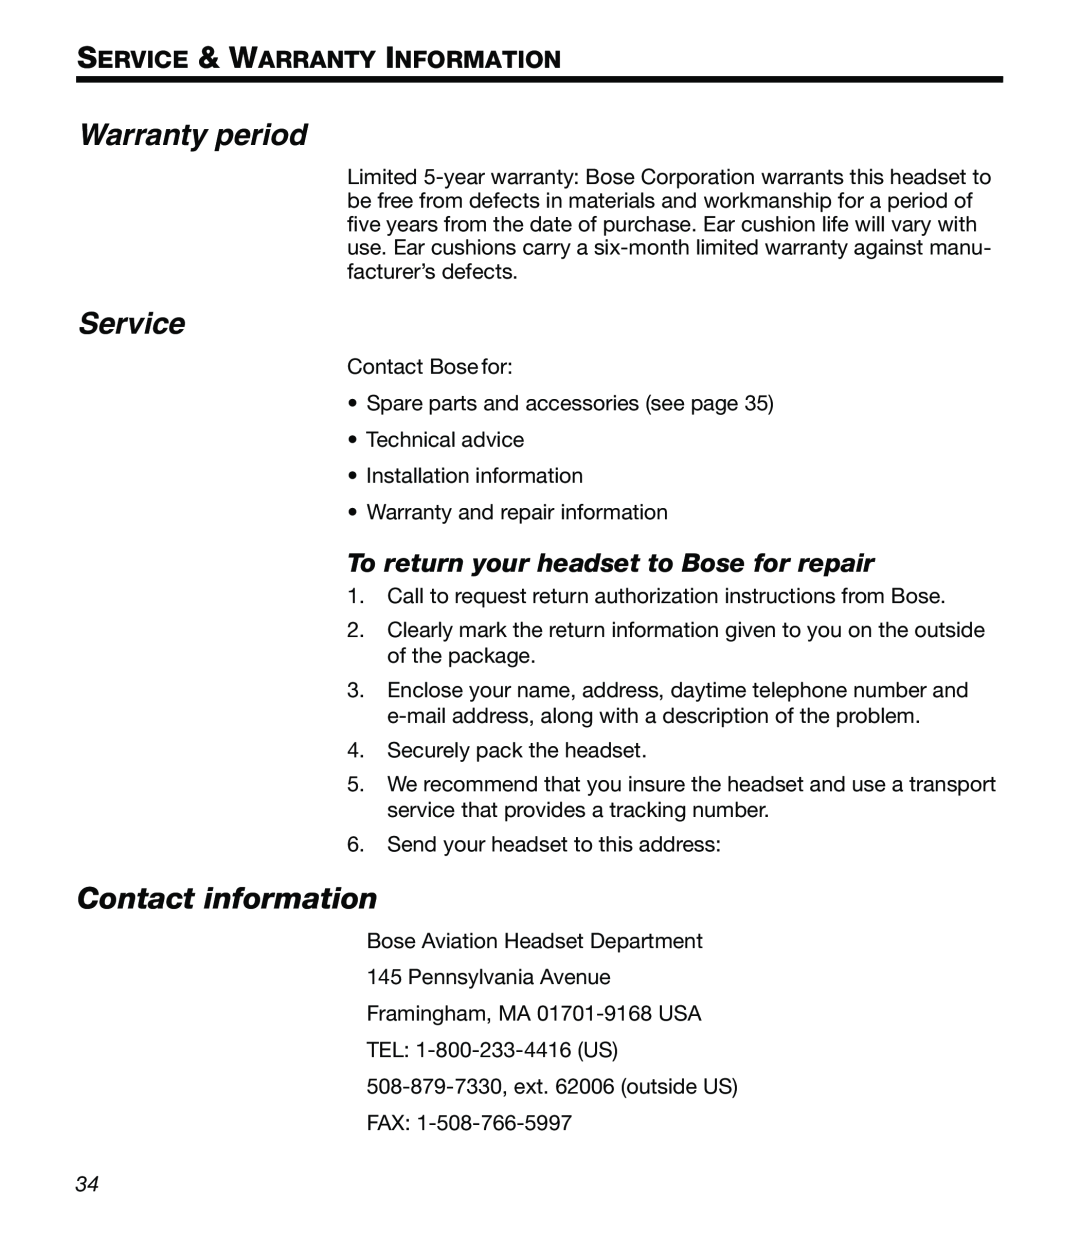 Bose X manual Warranty period, Service, Contact information, To return your headset to Bose for repair 